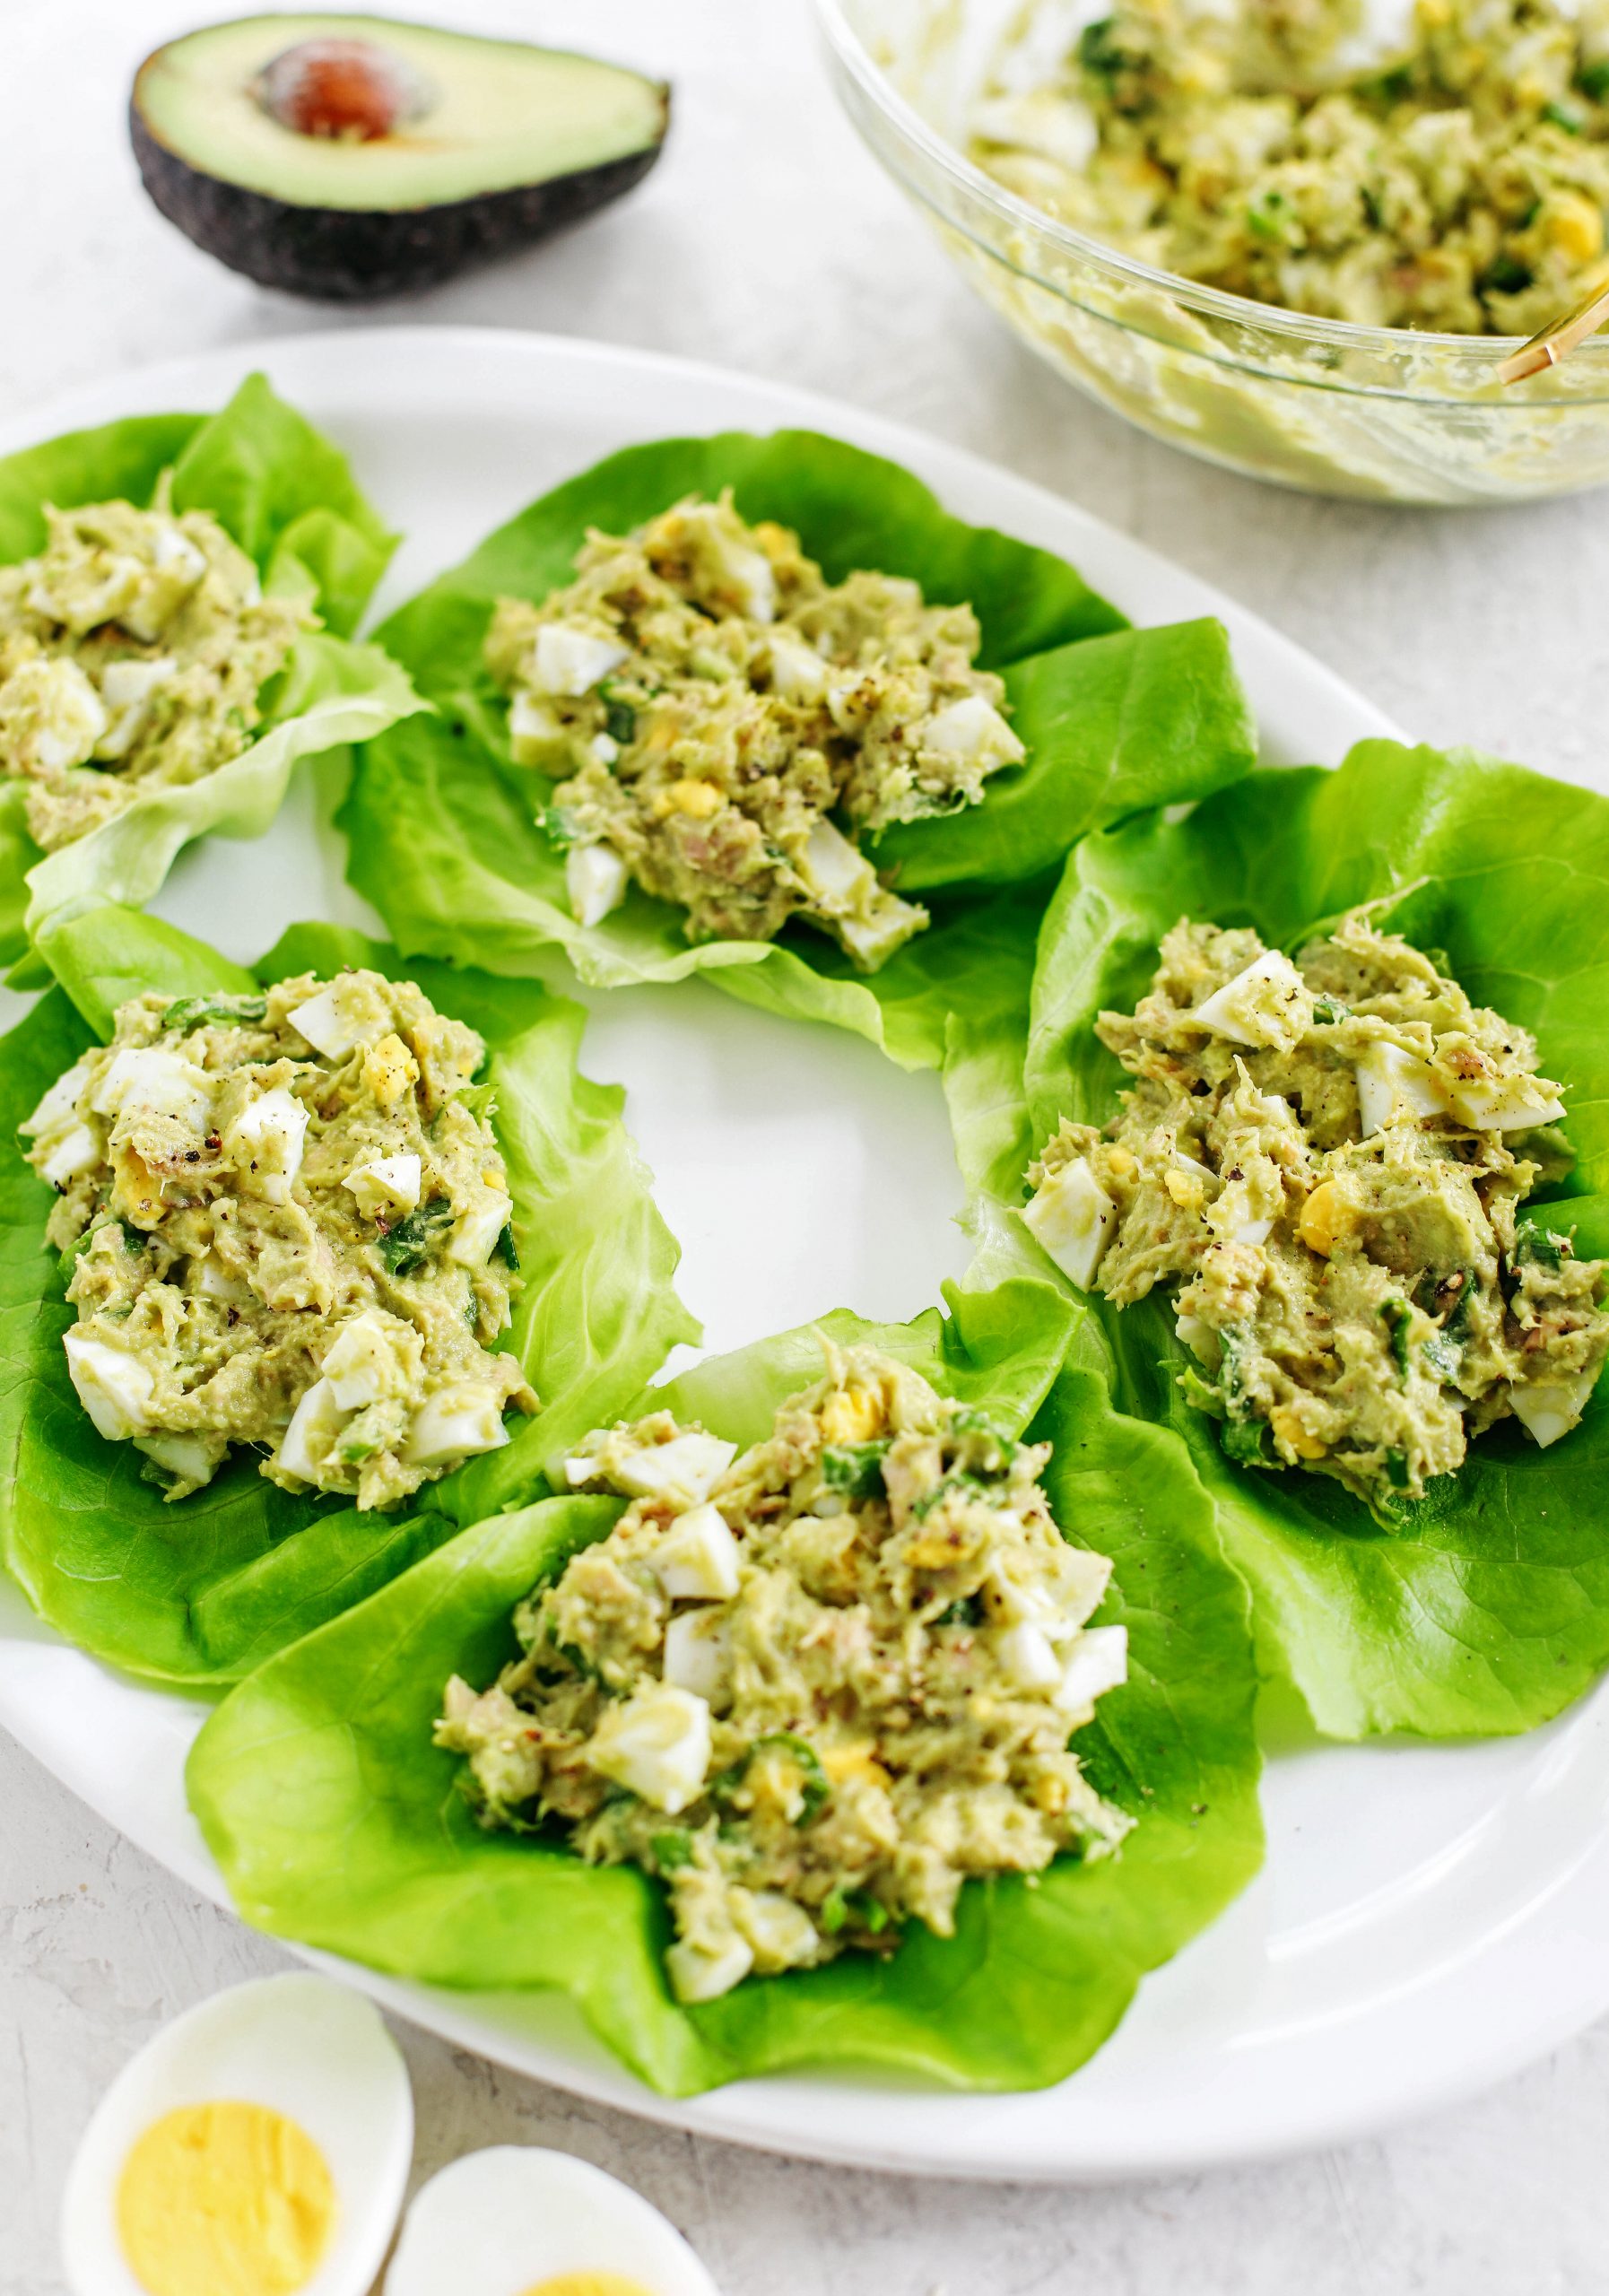 This 5-ingredient Tuna Avocado Egg Salad is fresh, delicious and only takes about 5 minutes to throw together for a healthy, protein-packed meal!  No mayo necessary!